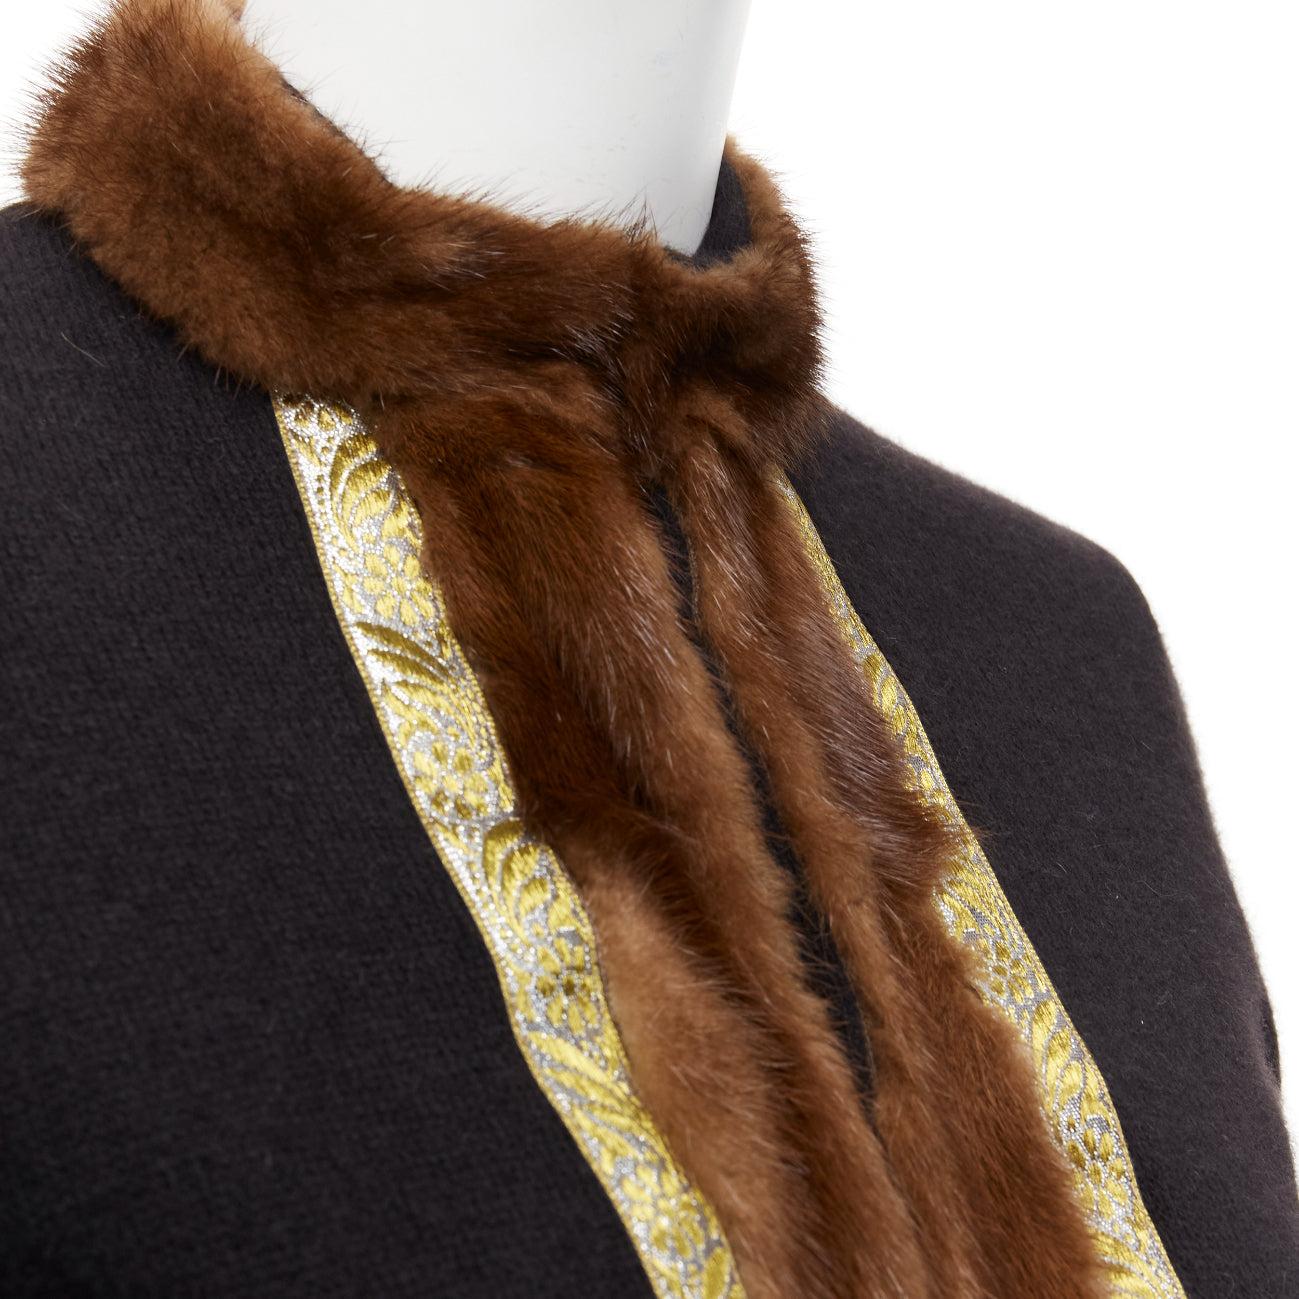 ETRO brown fur collar gold applique trim black wool cardigan IT42 M
Reference: DYTG/A00039
Brand: Etro
Material: Feels like wool, Fur
Color: Black, Brown
Pattern: Animal Print
Closure: Hook & Bar

CONDITION:
Condition: Excellent, this item was